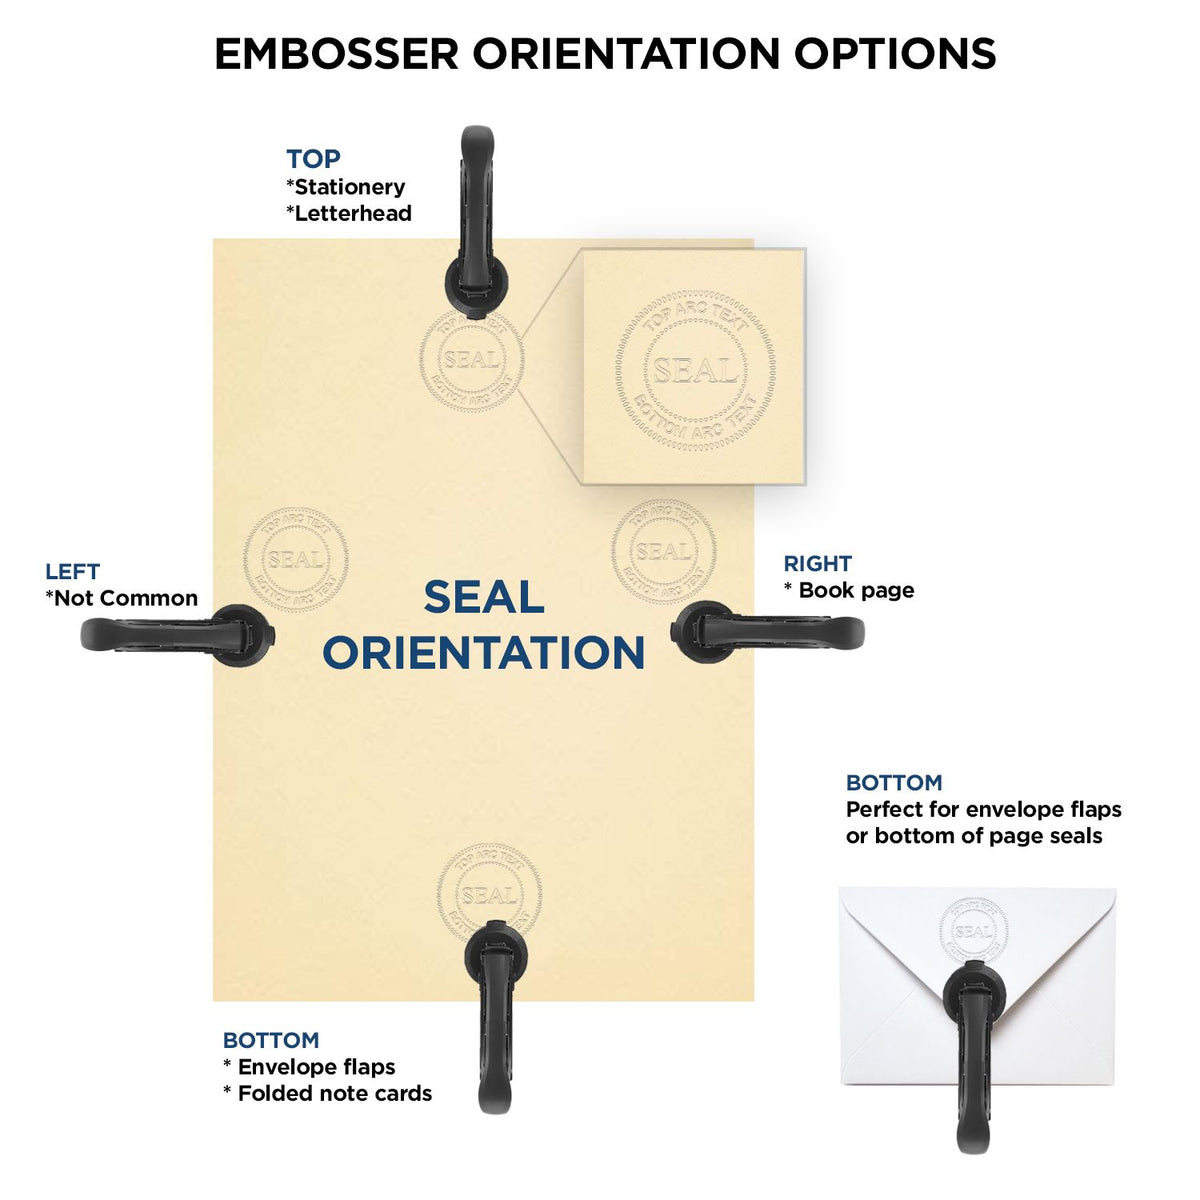 An infographic for the State of Michigan Long Reach Architectural Embossing Seal showing embosser orientation, this is showing examples of a top, bottom, right and left insert.